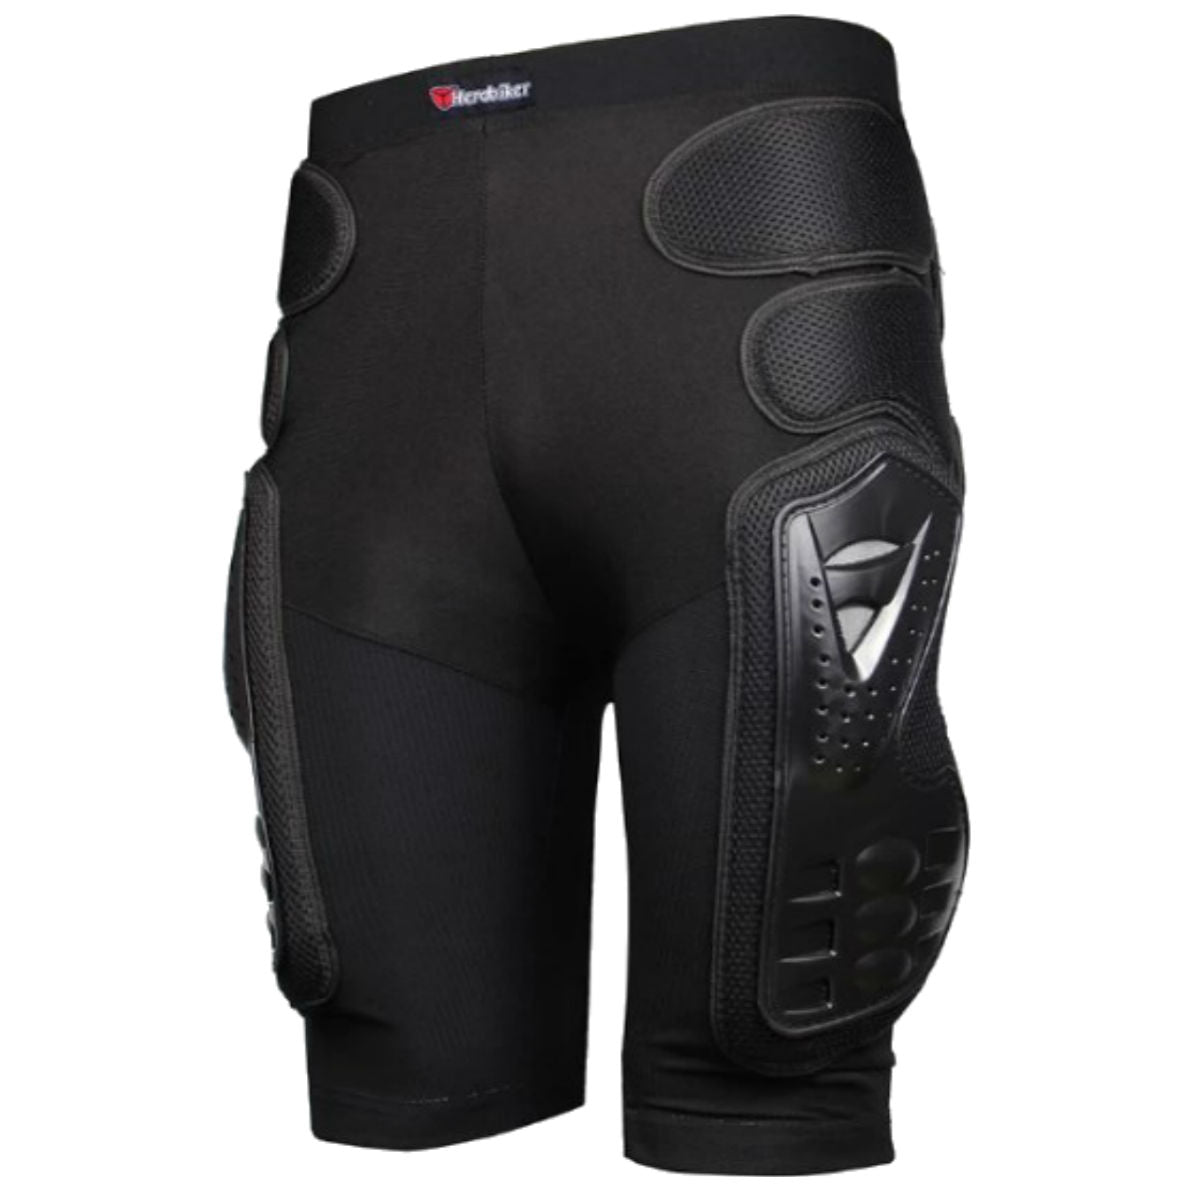 A black Motorcycle Protective Armor Pants for Men & Women, with knee pads, providing protective gear and serving as armor pants.